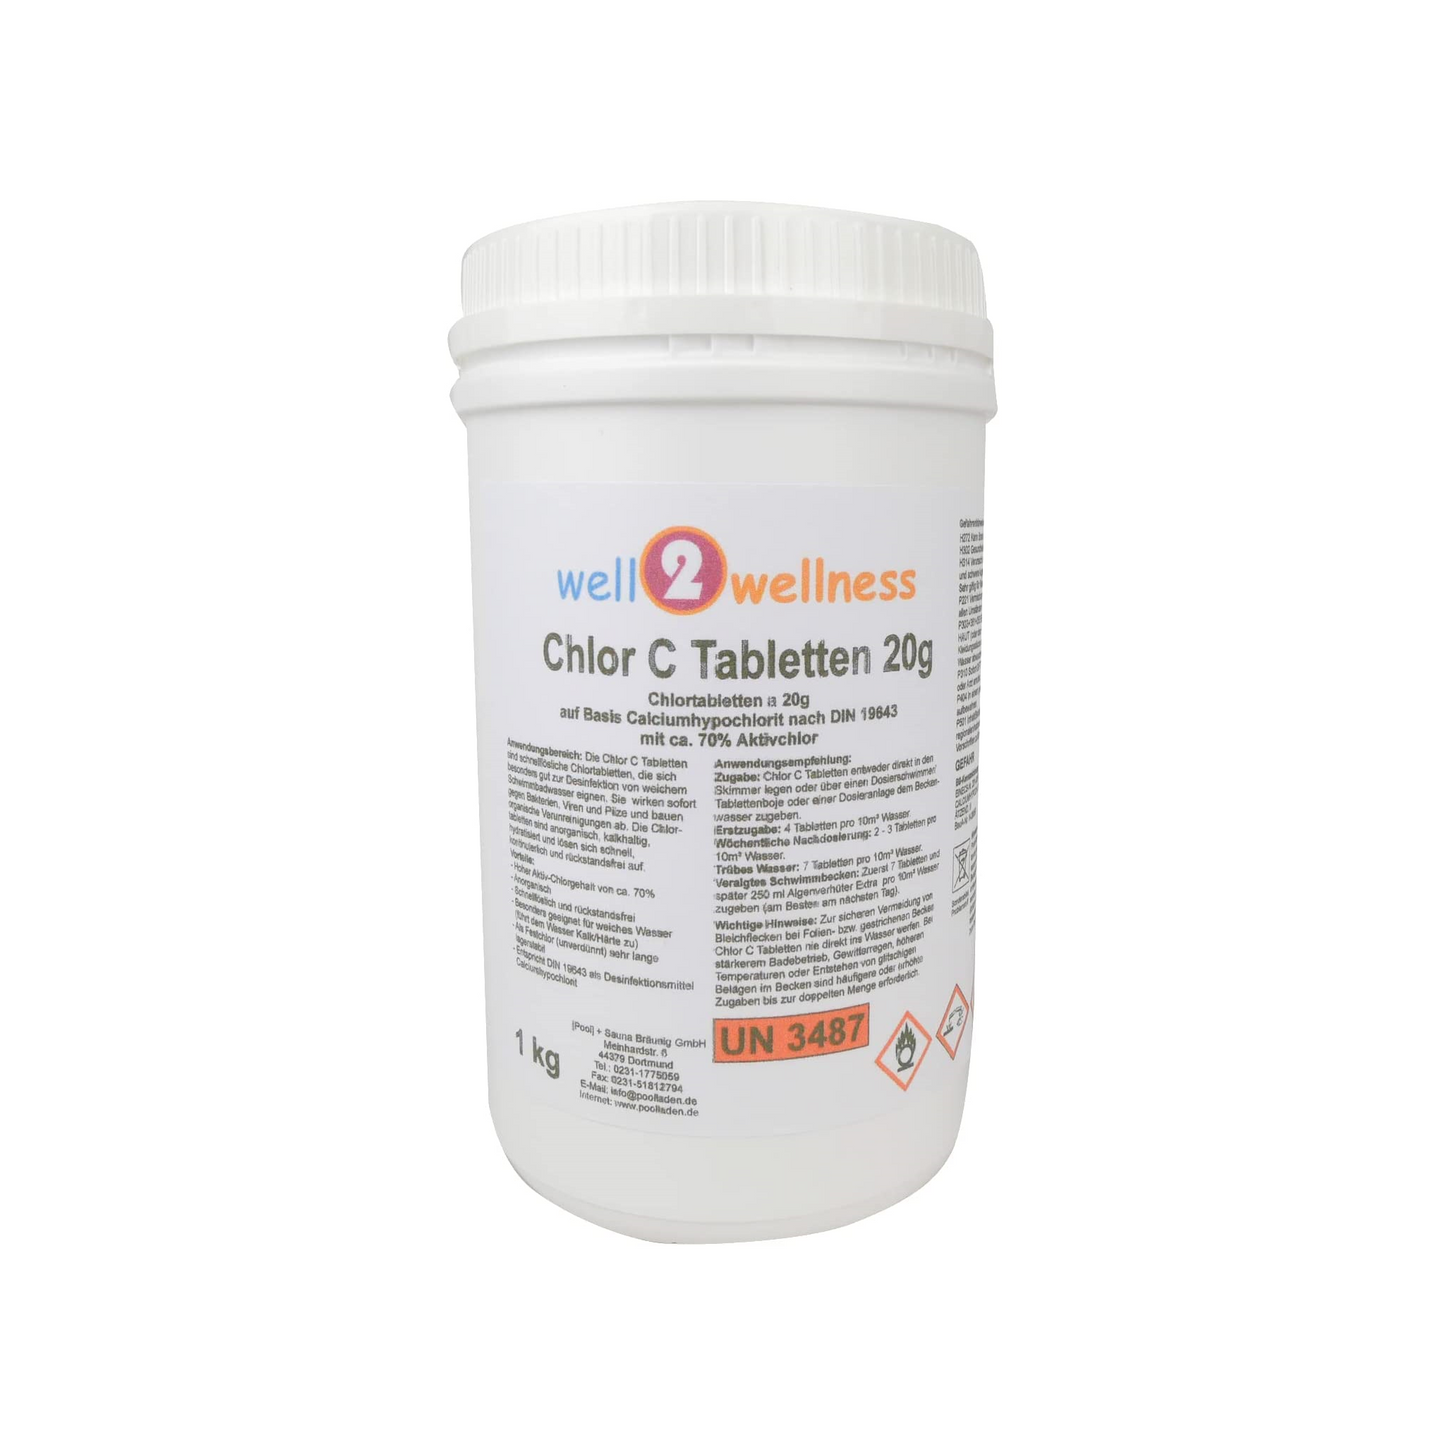 well2wellness® Chlor C Tabs 20g - Calciumhypochlorit